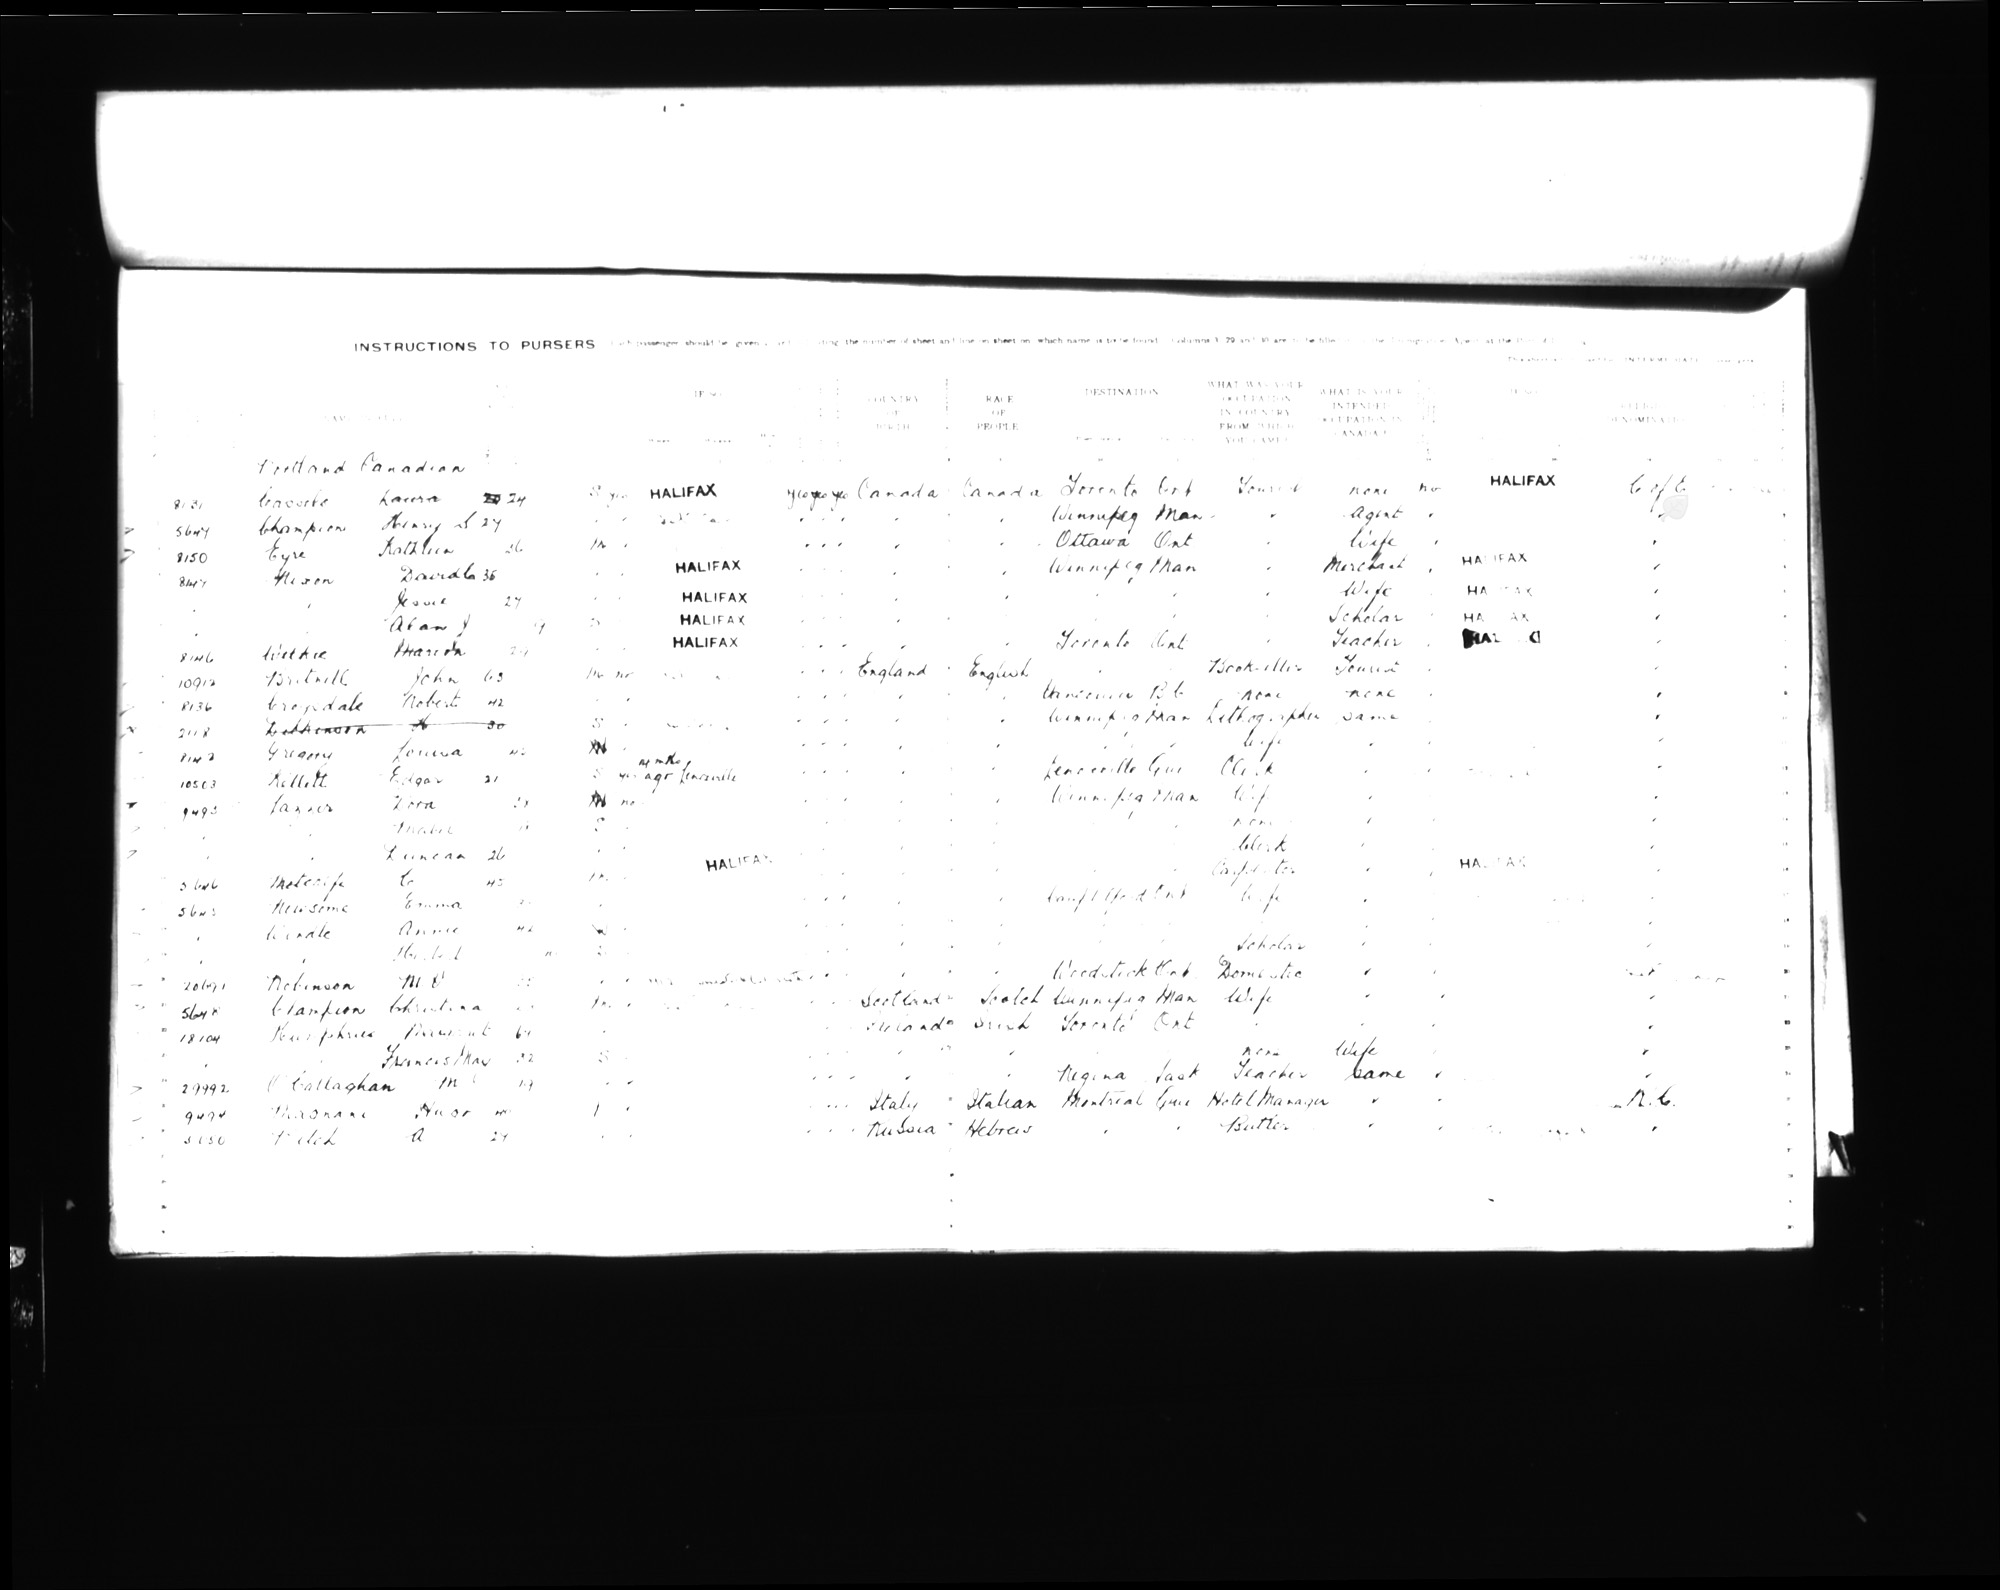 Digitized page of Passenger Lists for Image No.: CANIMM1913PLIST_0000406960-00598